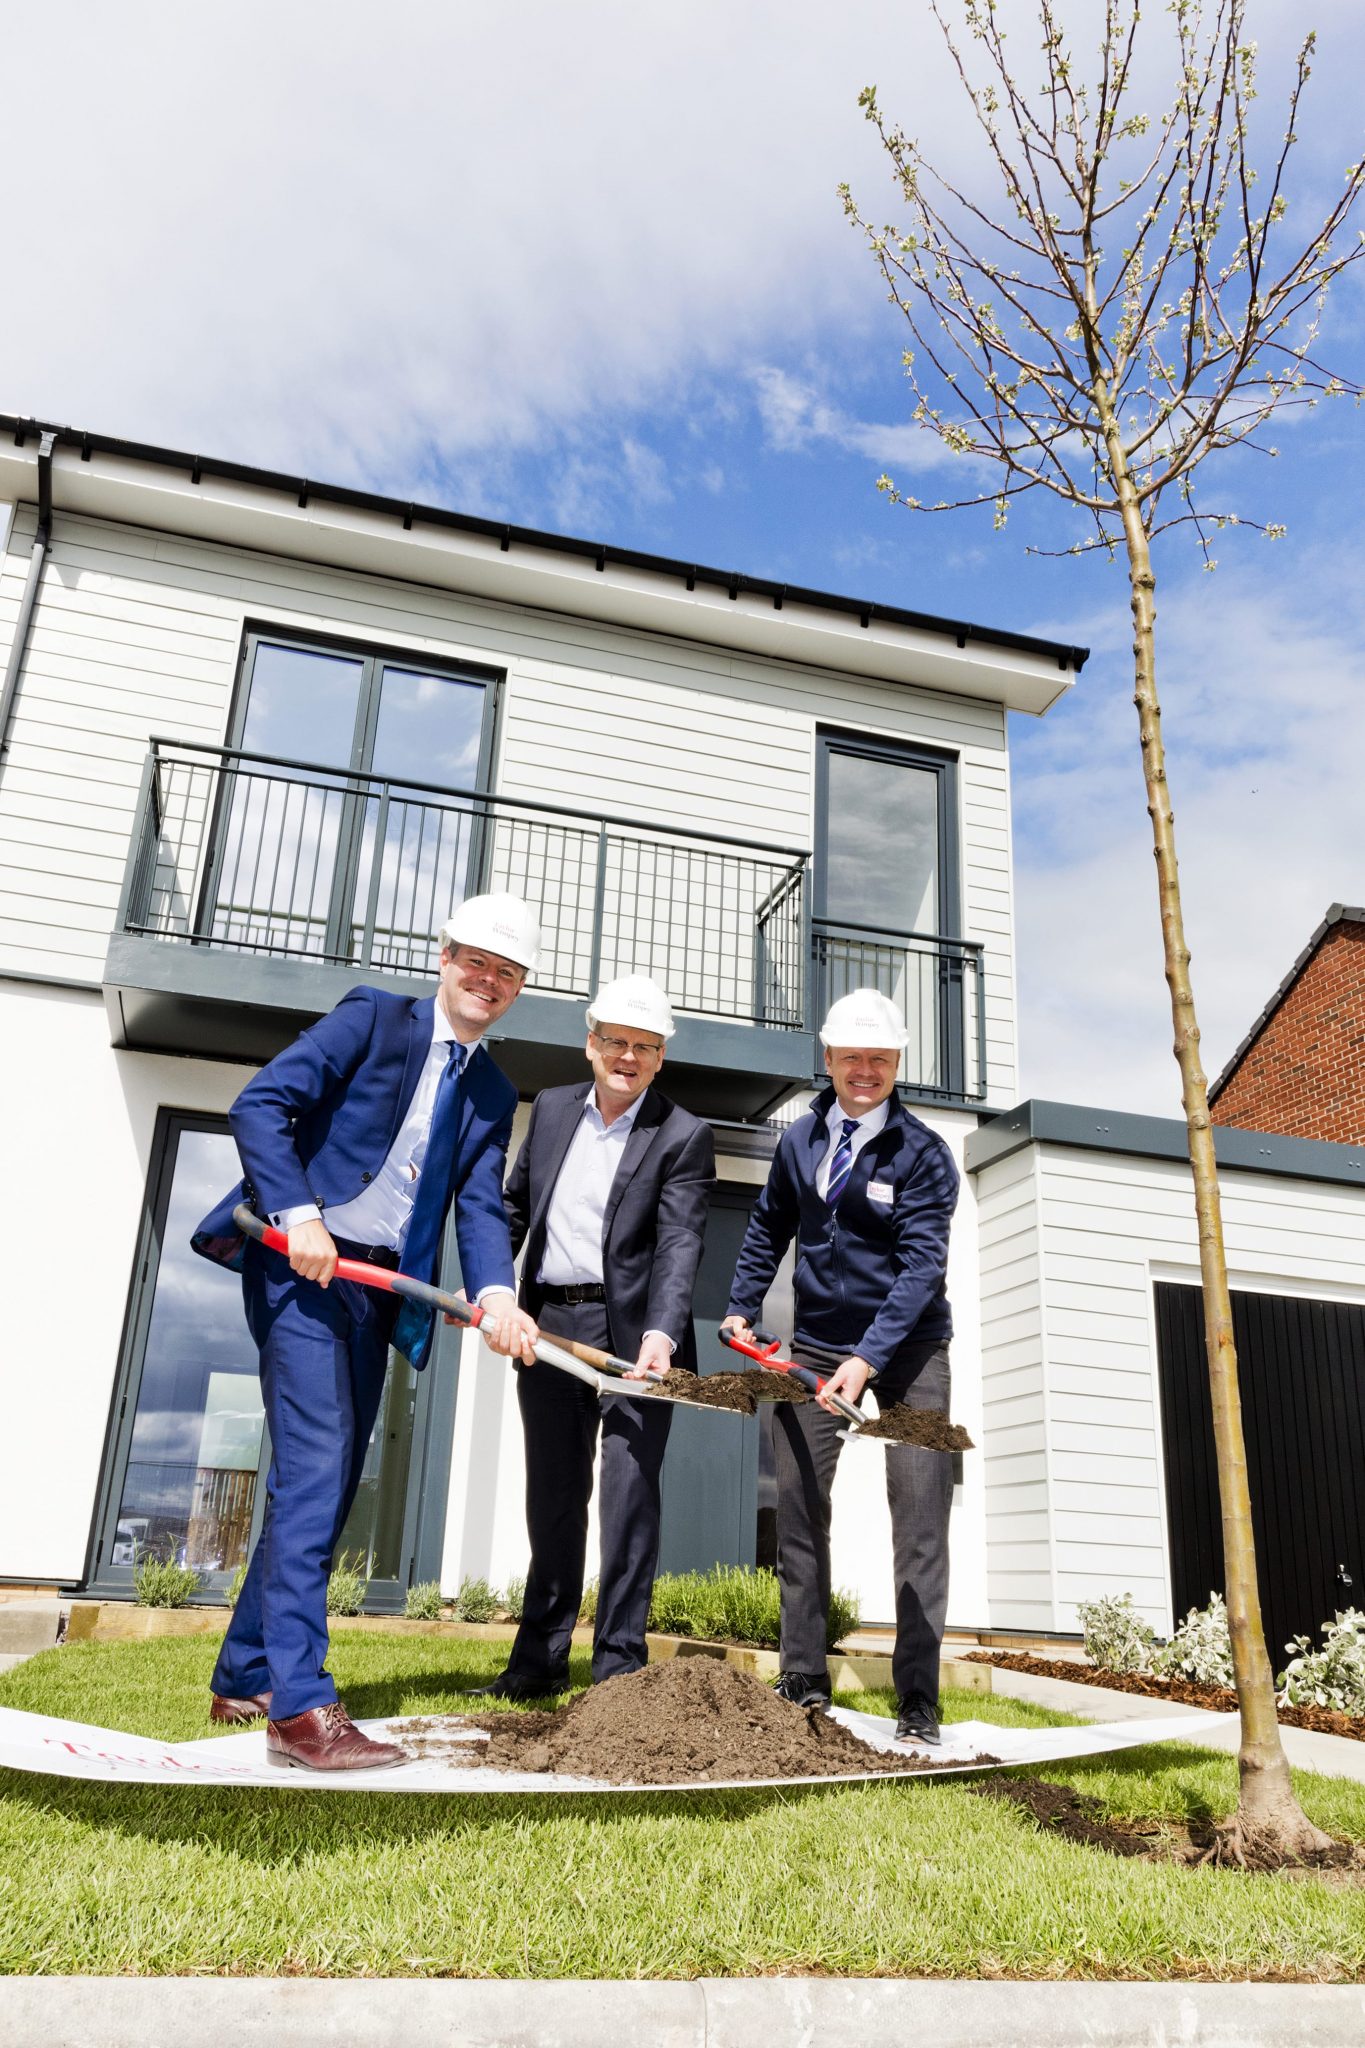 Major housebuilder launches pilot scheme to address the needs of future generations @TaylorWimpey